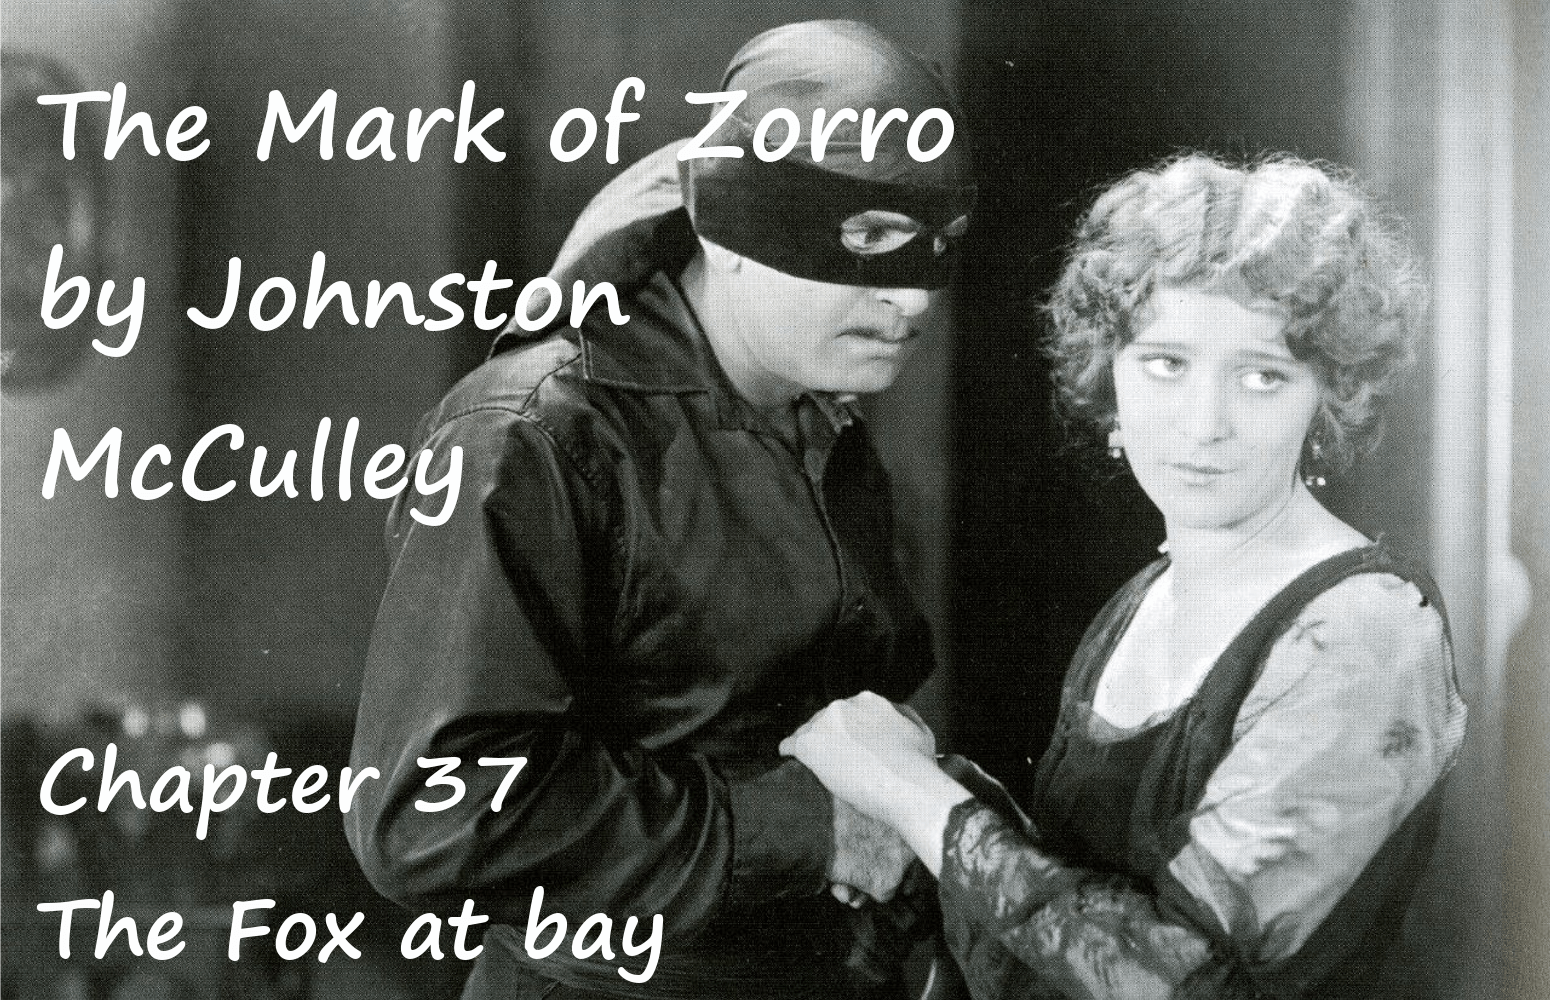 The Mark of Zorro chapter 37 The Fox at bay by Johnston McCulley